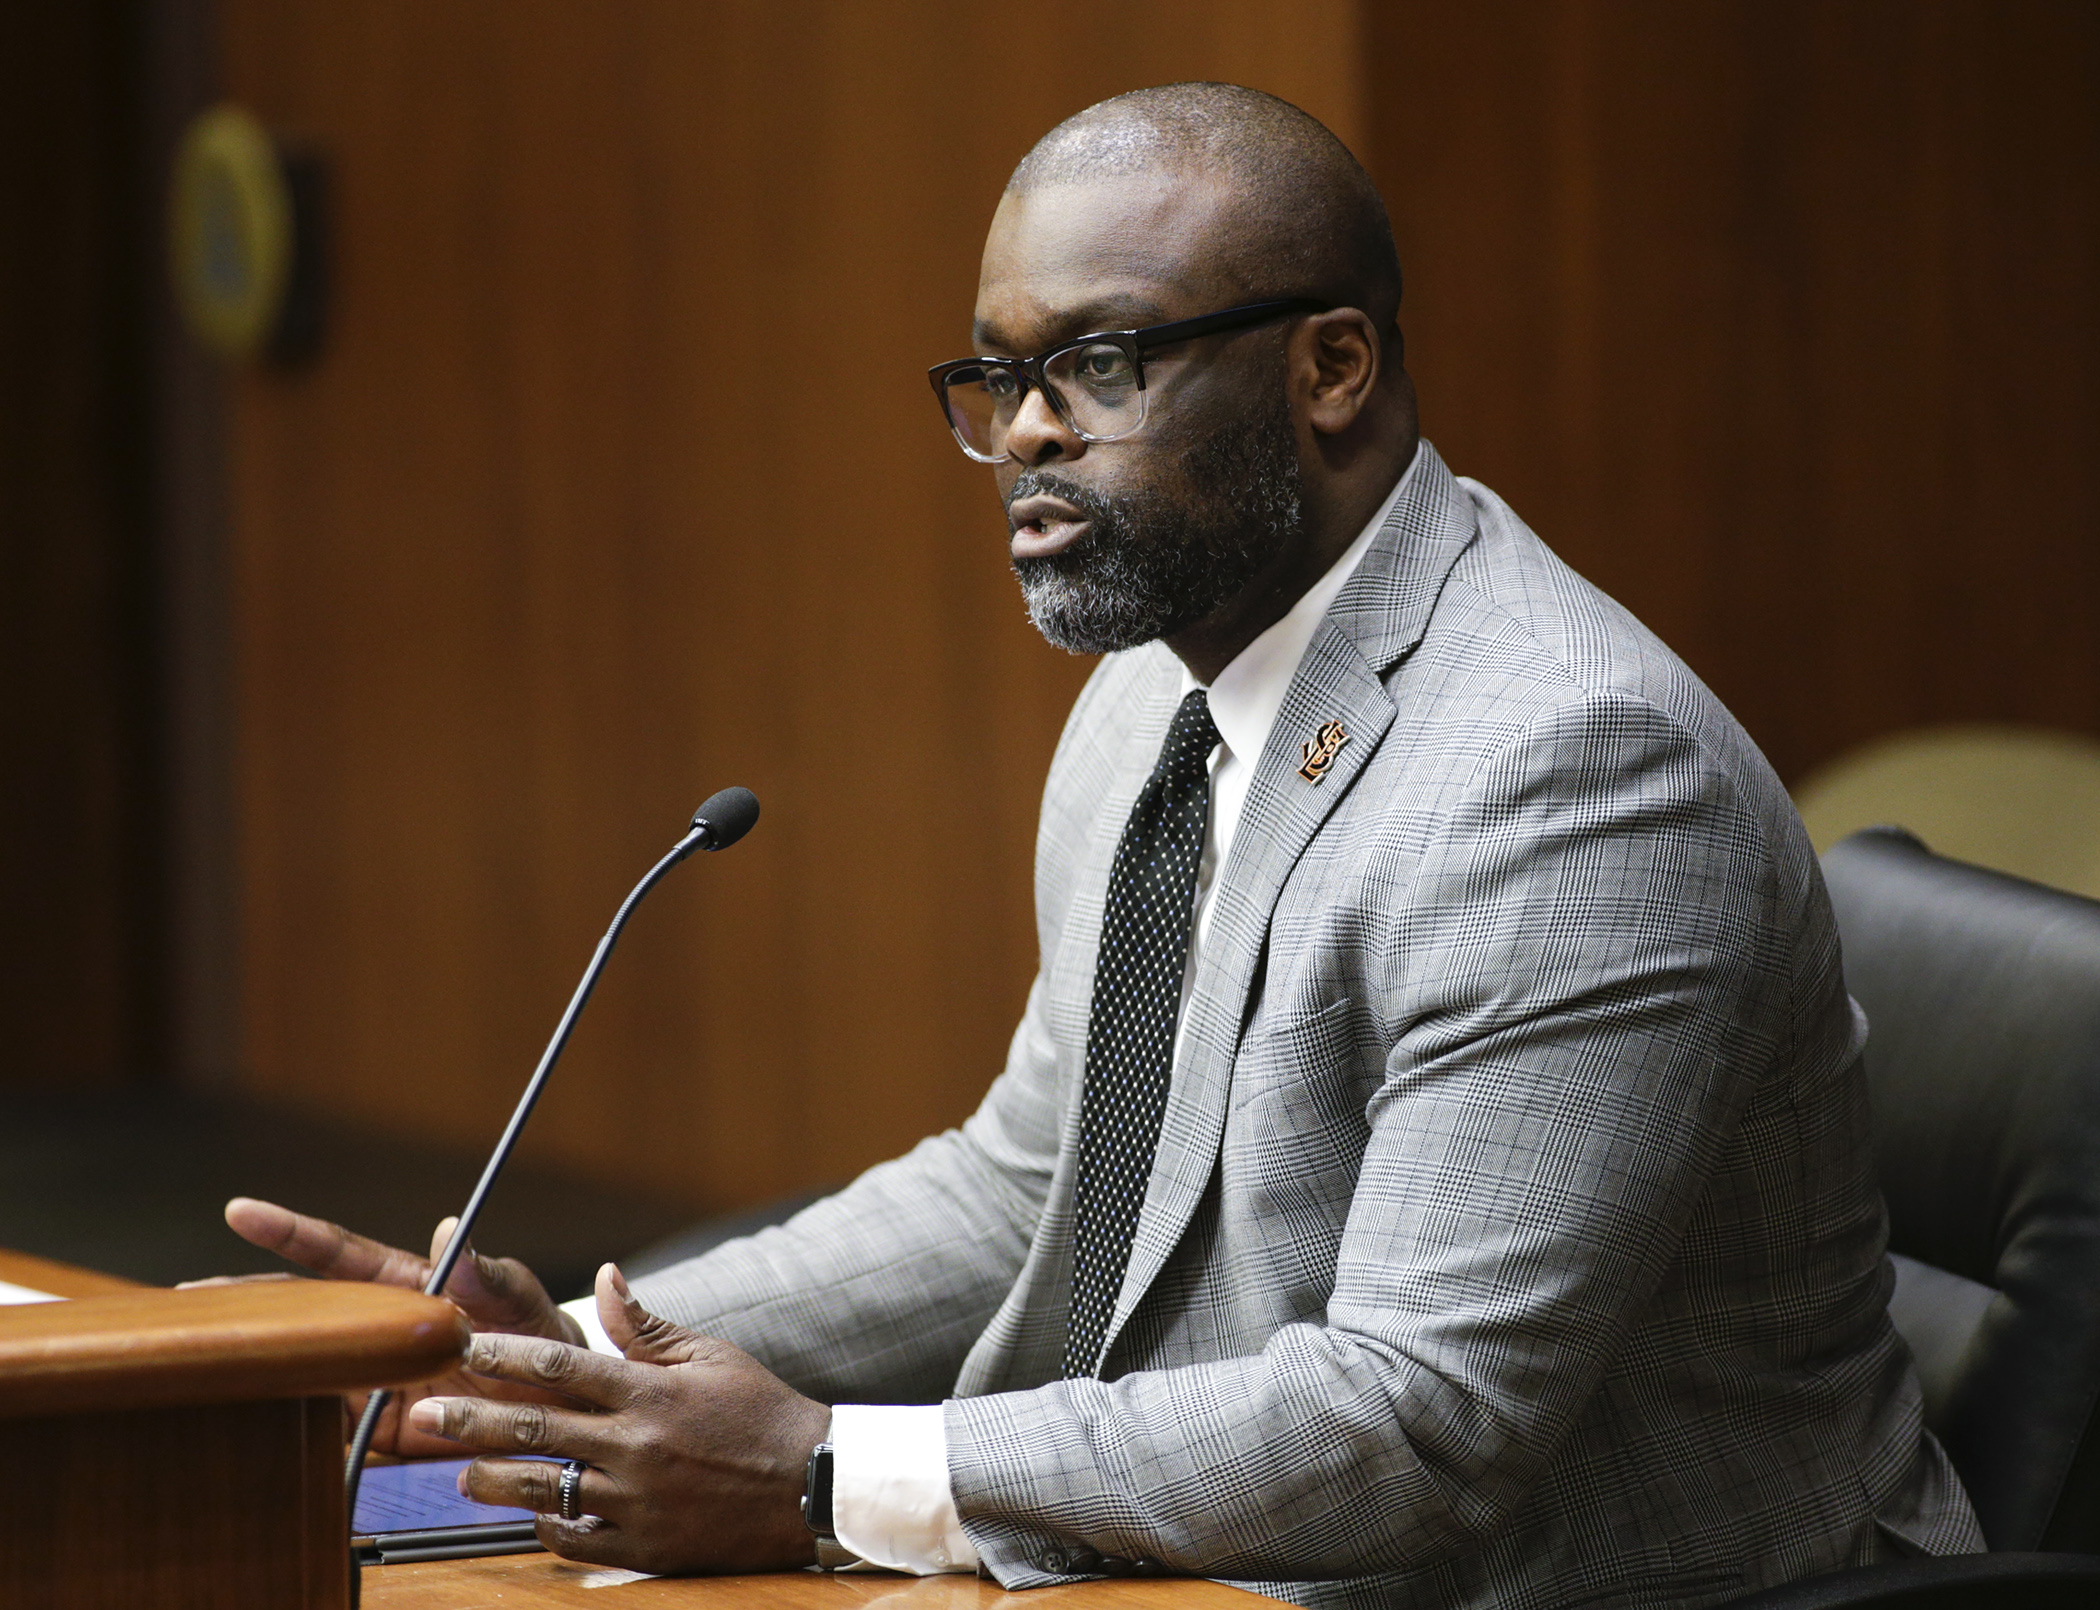 St. Louis Park Schools Superintendent Astein Osei testifies Jan. 29 in the House Education Policy Committee about what his district is doing to lessen the opportunity gap for students. Photo by Paul Battaglia